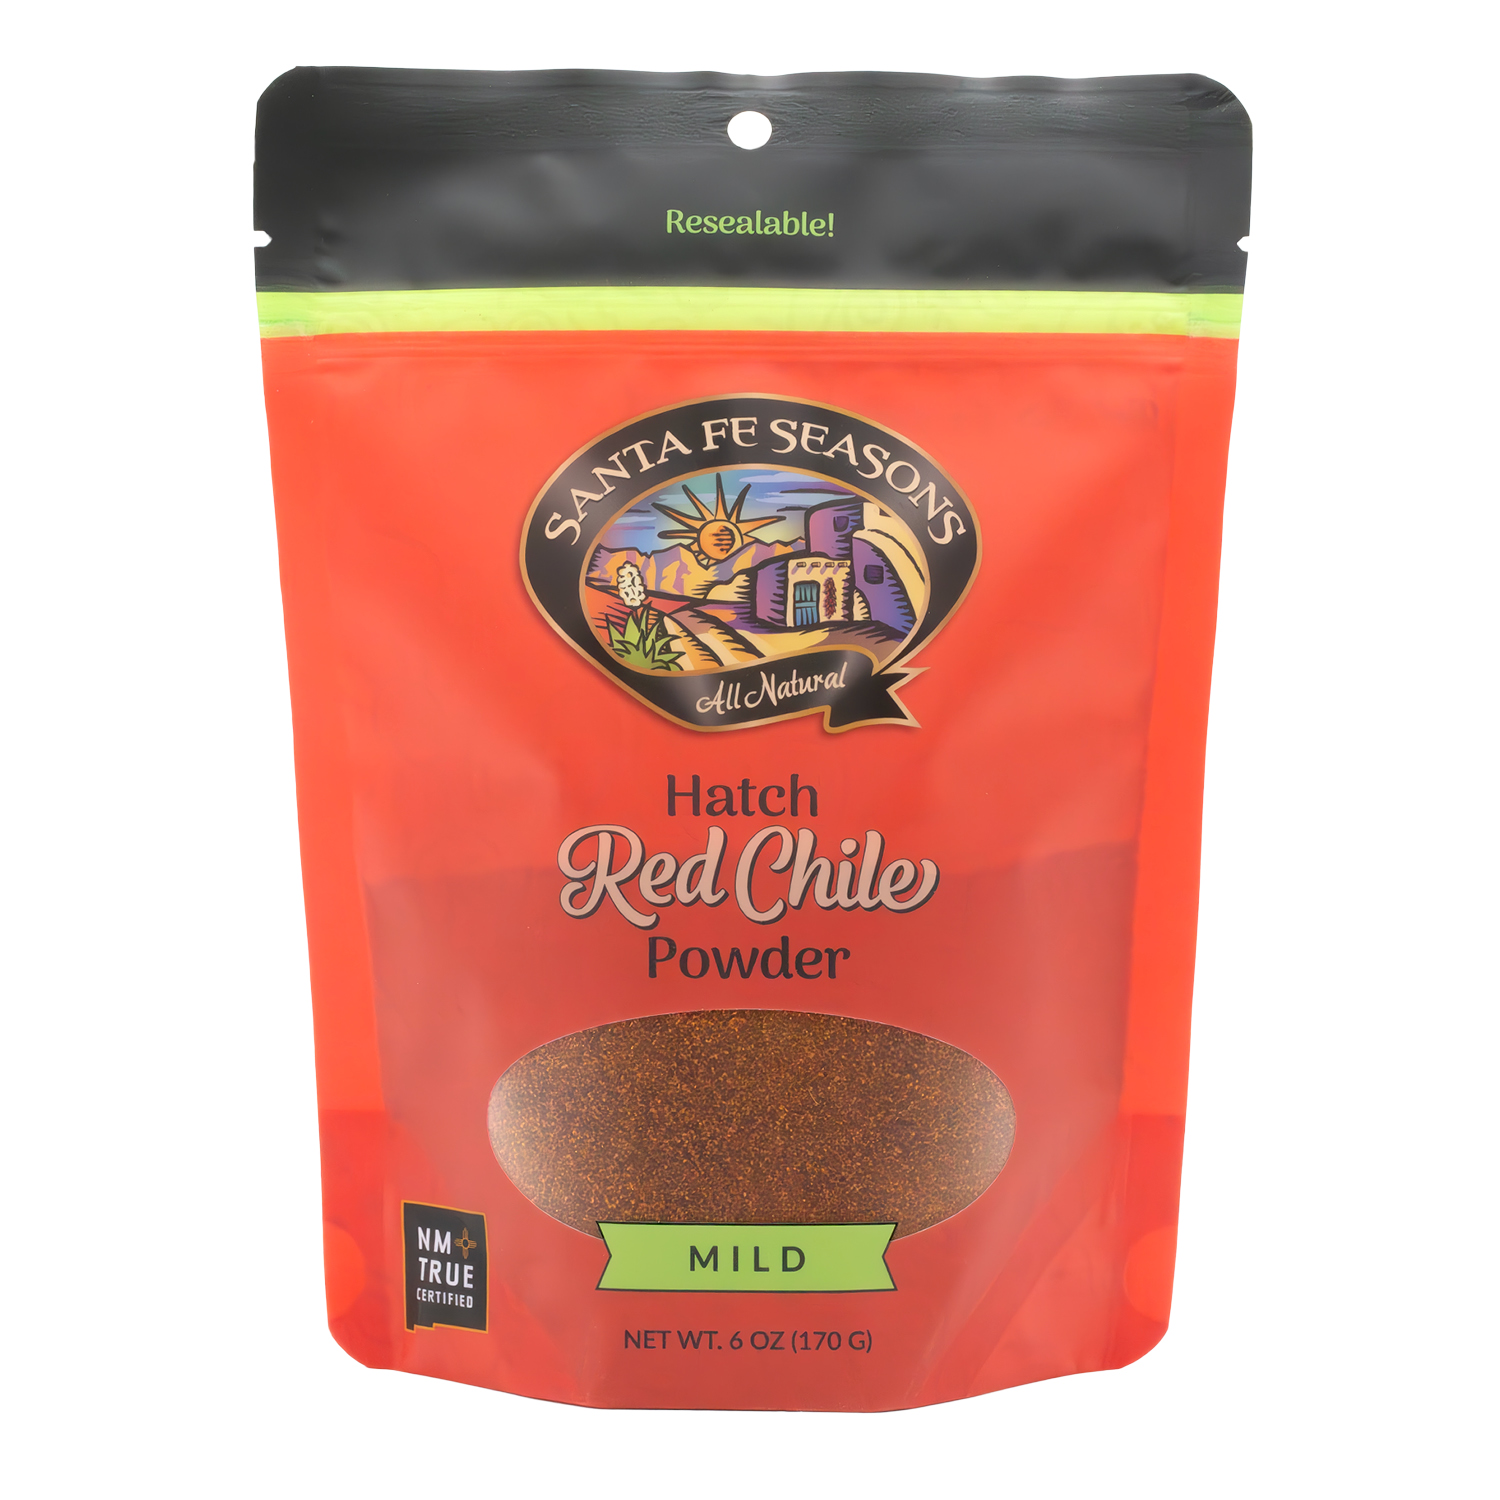 Product image of mild red chile powder